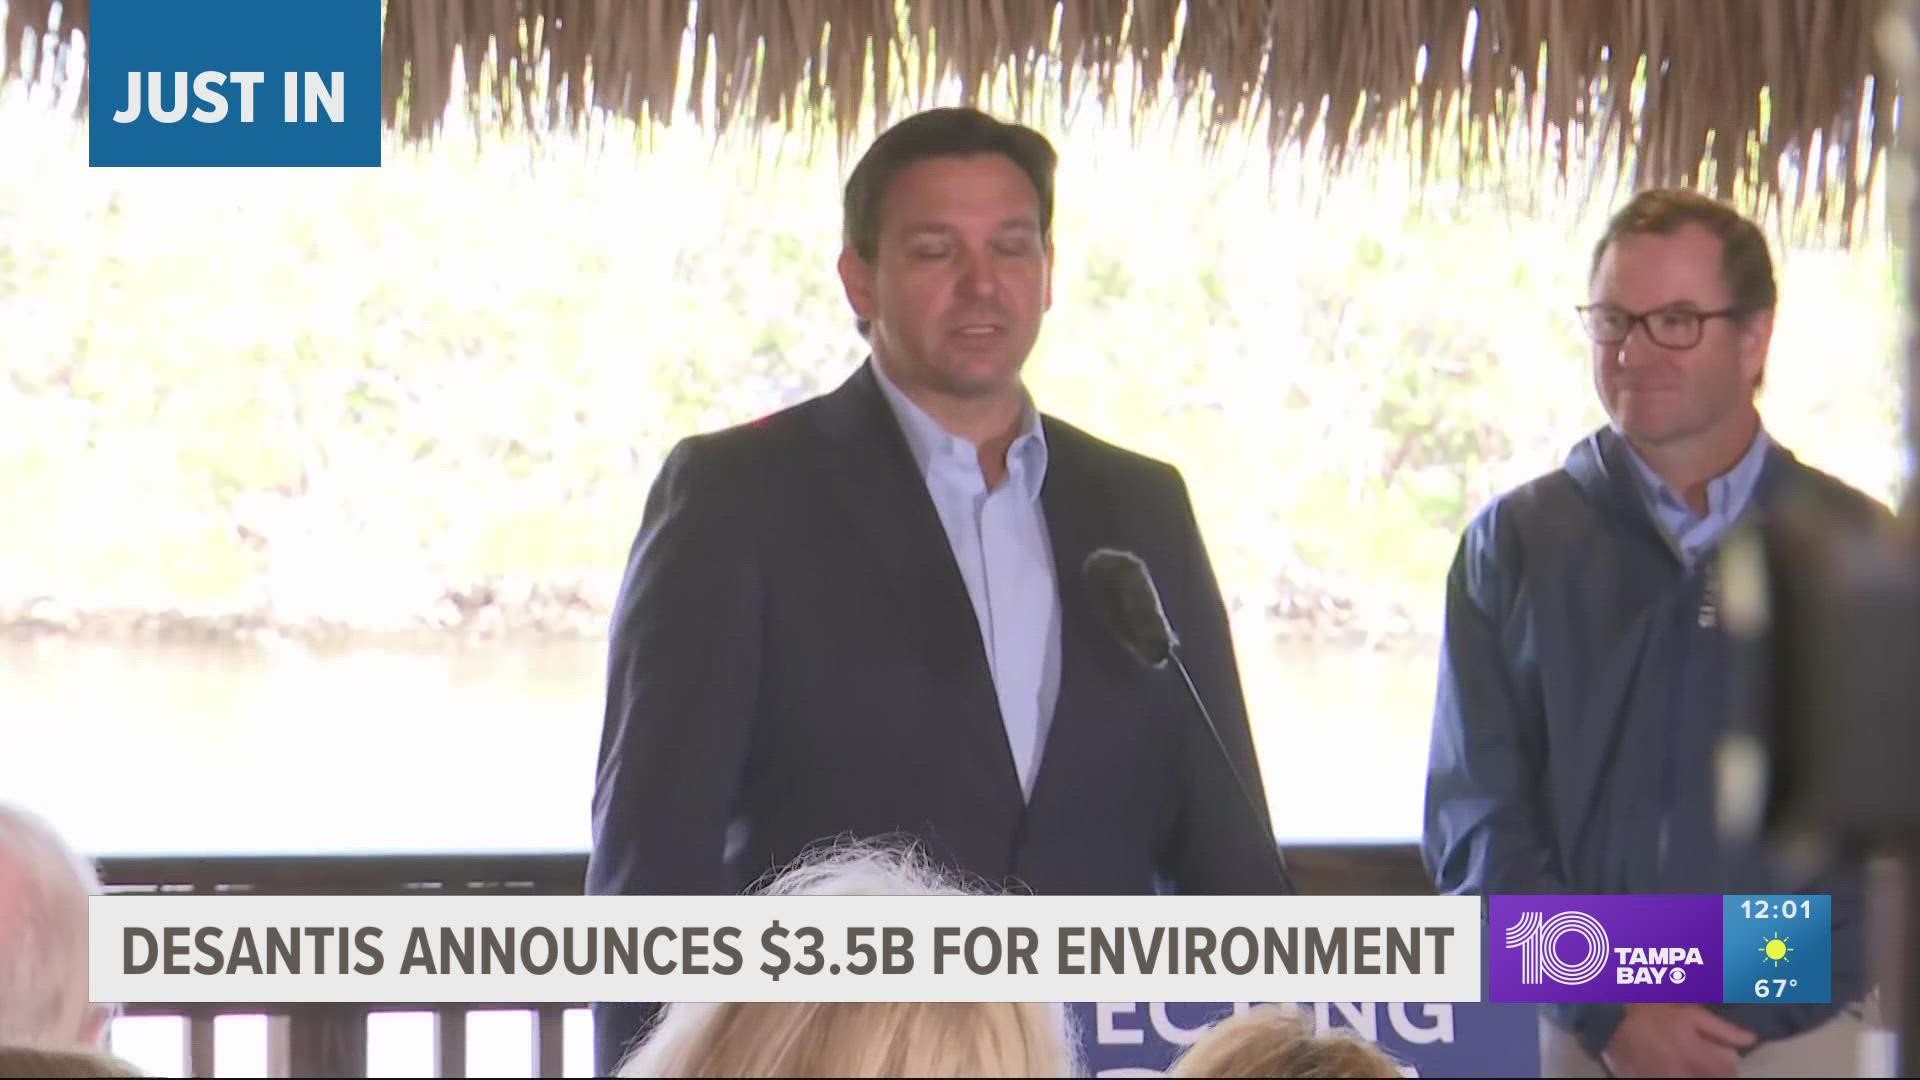 The governor says this is something we need to do, not just for our environment but the state's economy.